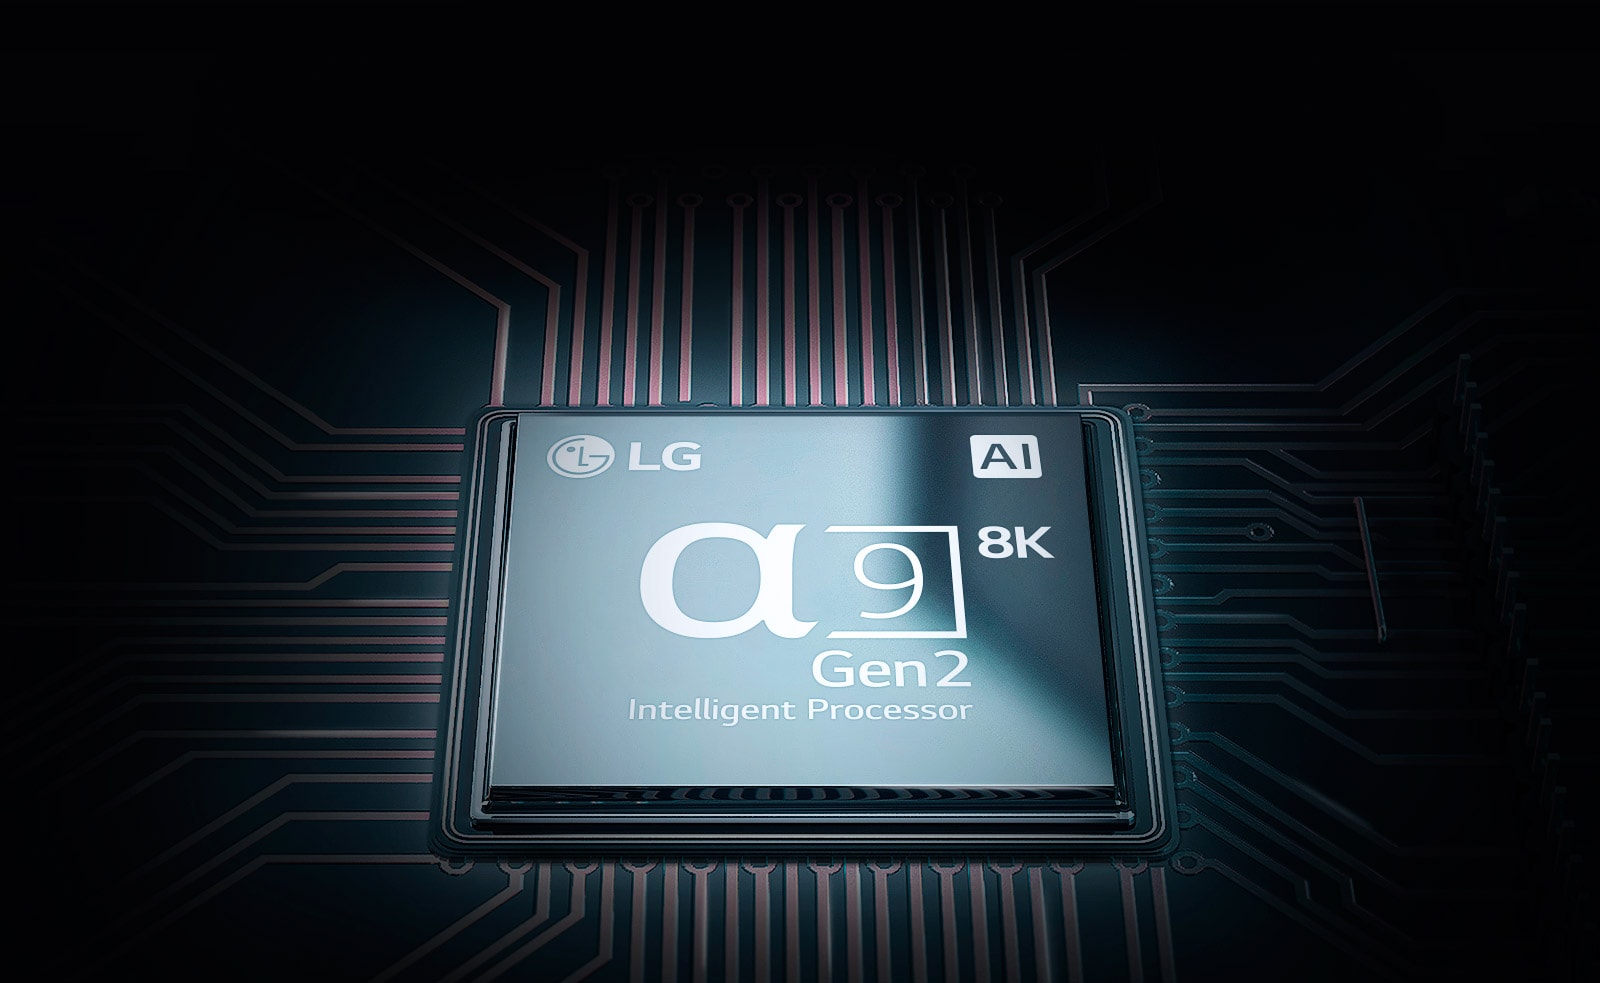 LG’s Most Powerful LED Processor in Stunning 8K1